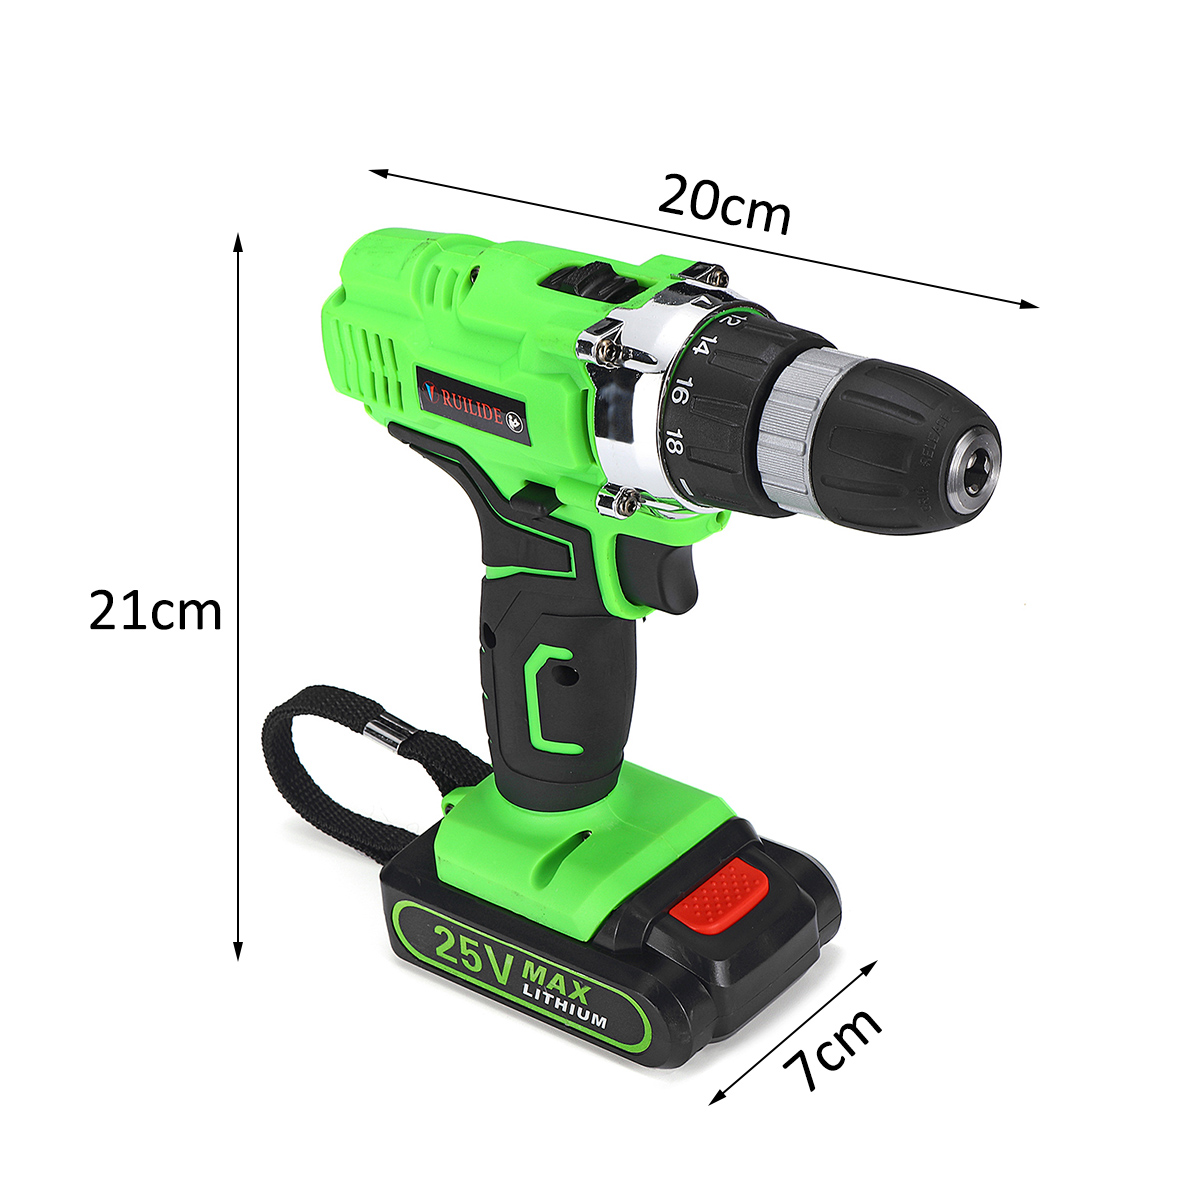 25V-Li-ion-Electric-Screwdriver-Dual-Speed-Power-Screw-Driver-Tool-For-DIY-Building-Engineering-1368106-4